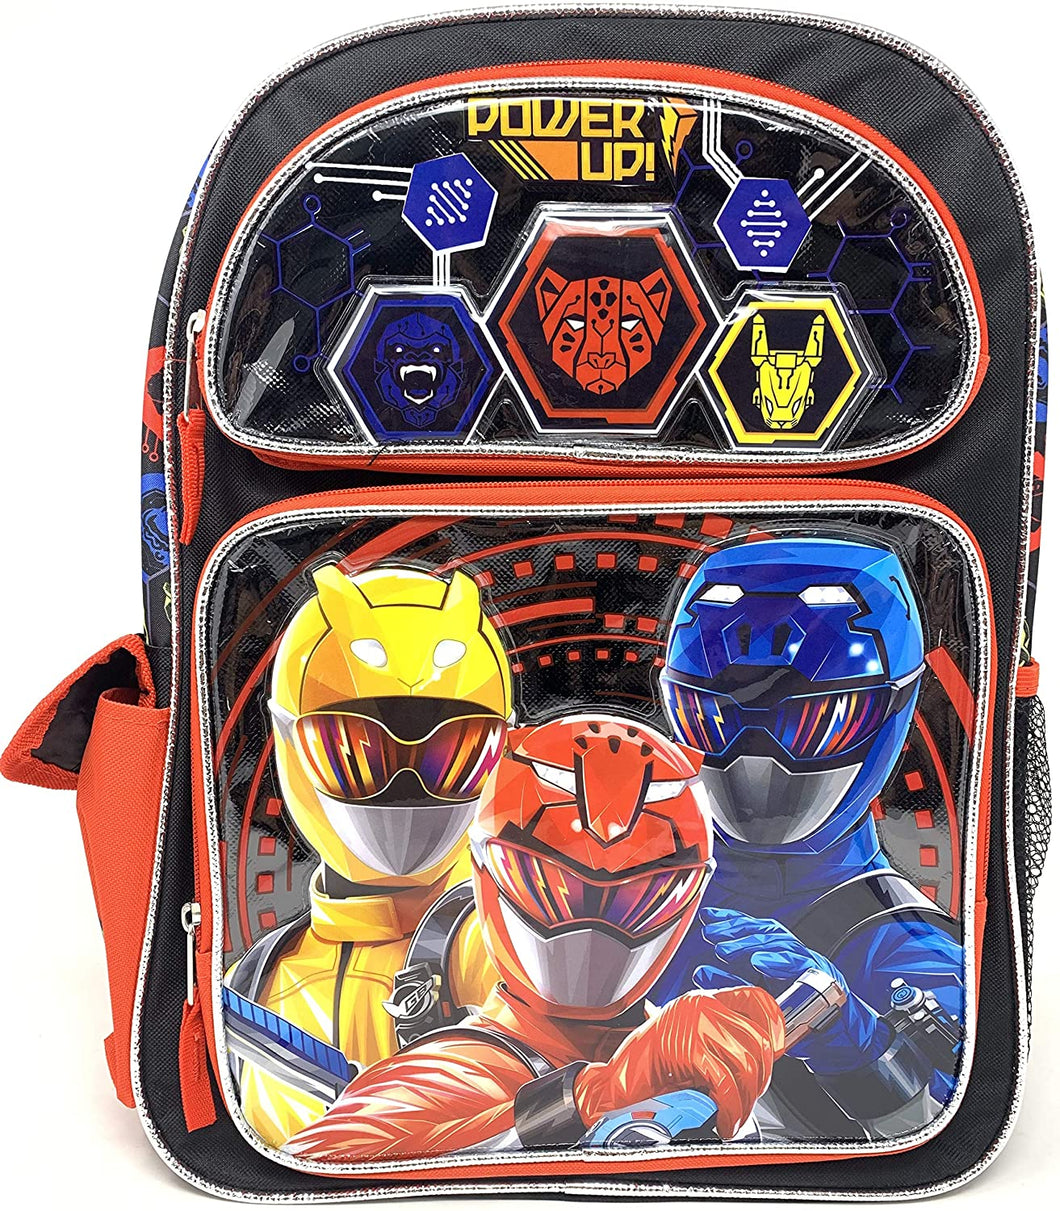 Saban's Power Rangers 16 inch Backpack with Side Pockets - Power Up!